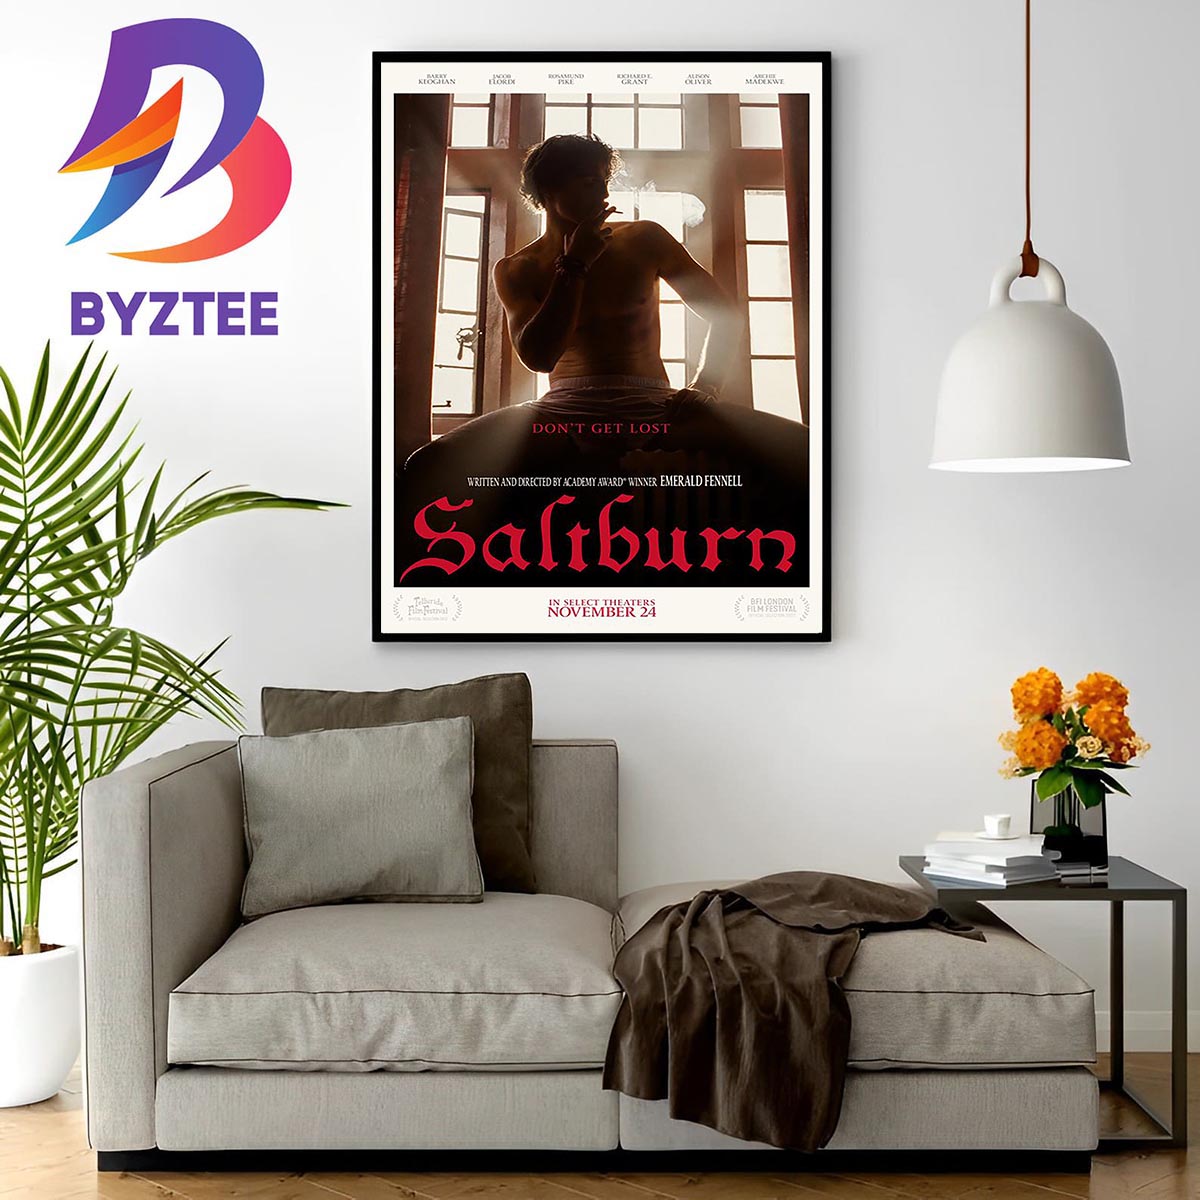 Official Poster For Saltburn Of Emerald Fennell With Starring Jacob Elordi  And Barry Keoghan Wall Decor Poster Canvas - Byztee